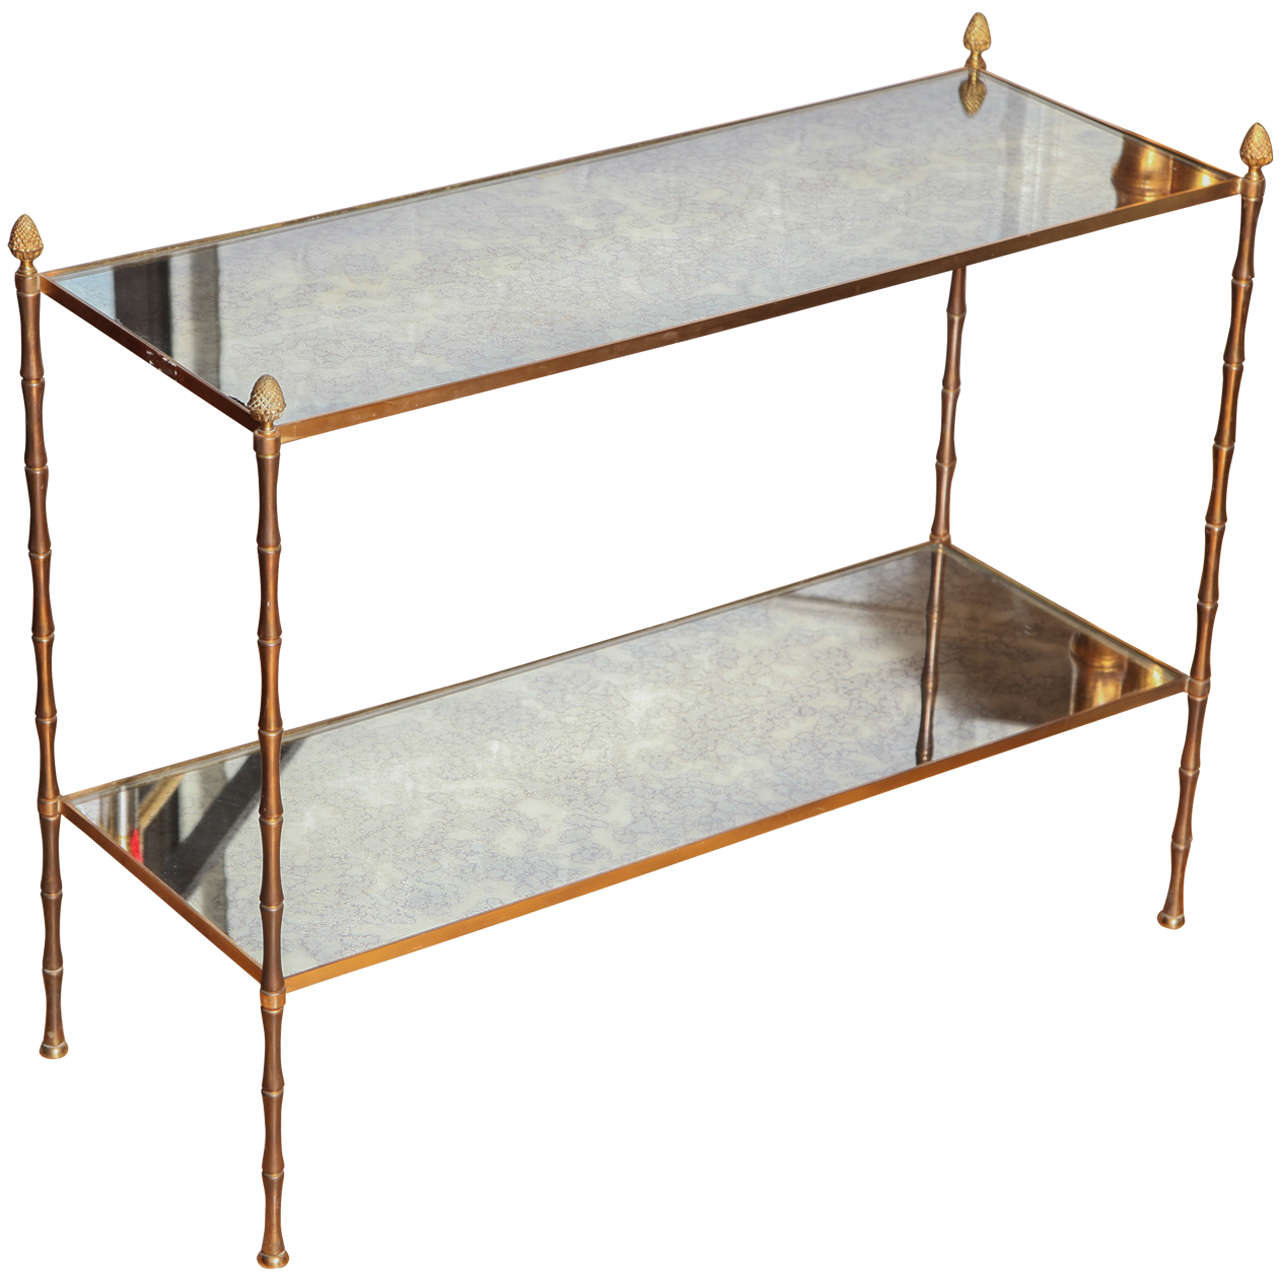 A Gilt Brass Two Tier Faux Bamboo and Mirrored Etagere Table. France , C. 1950